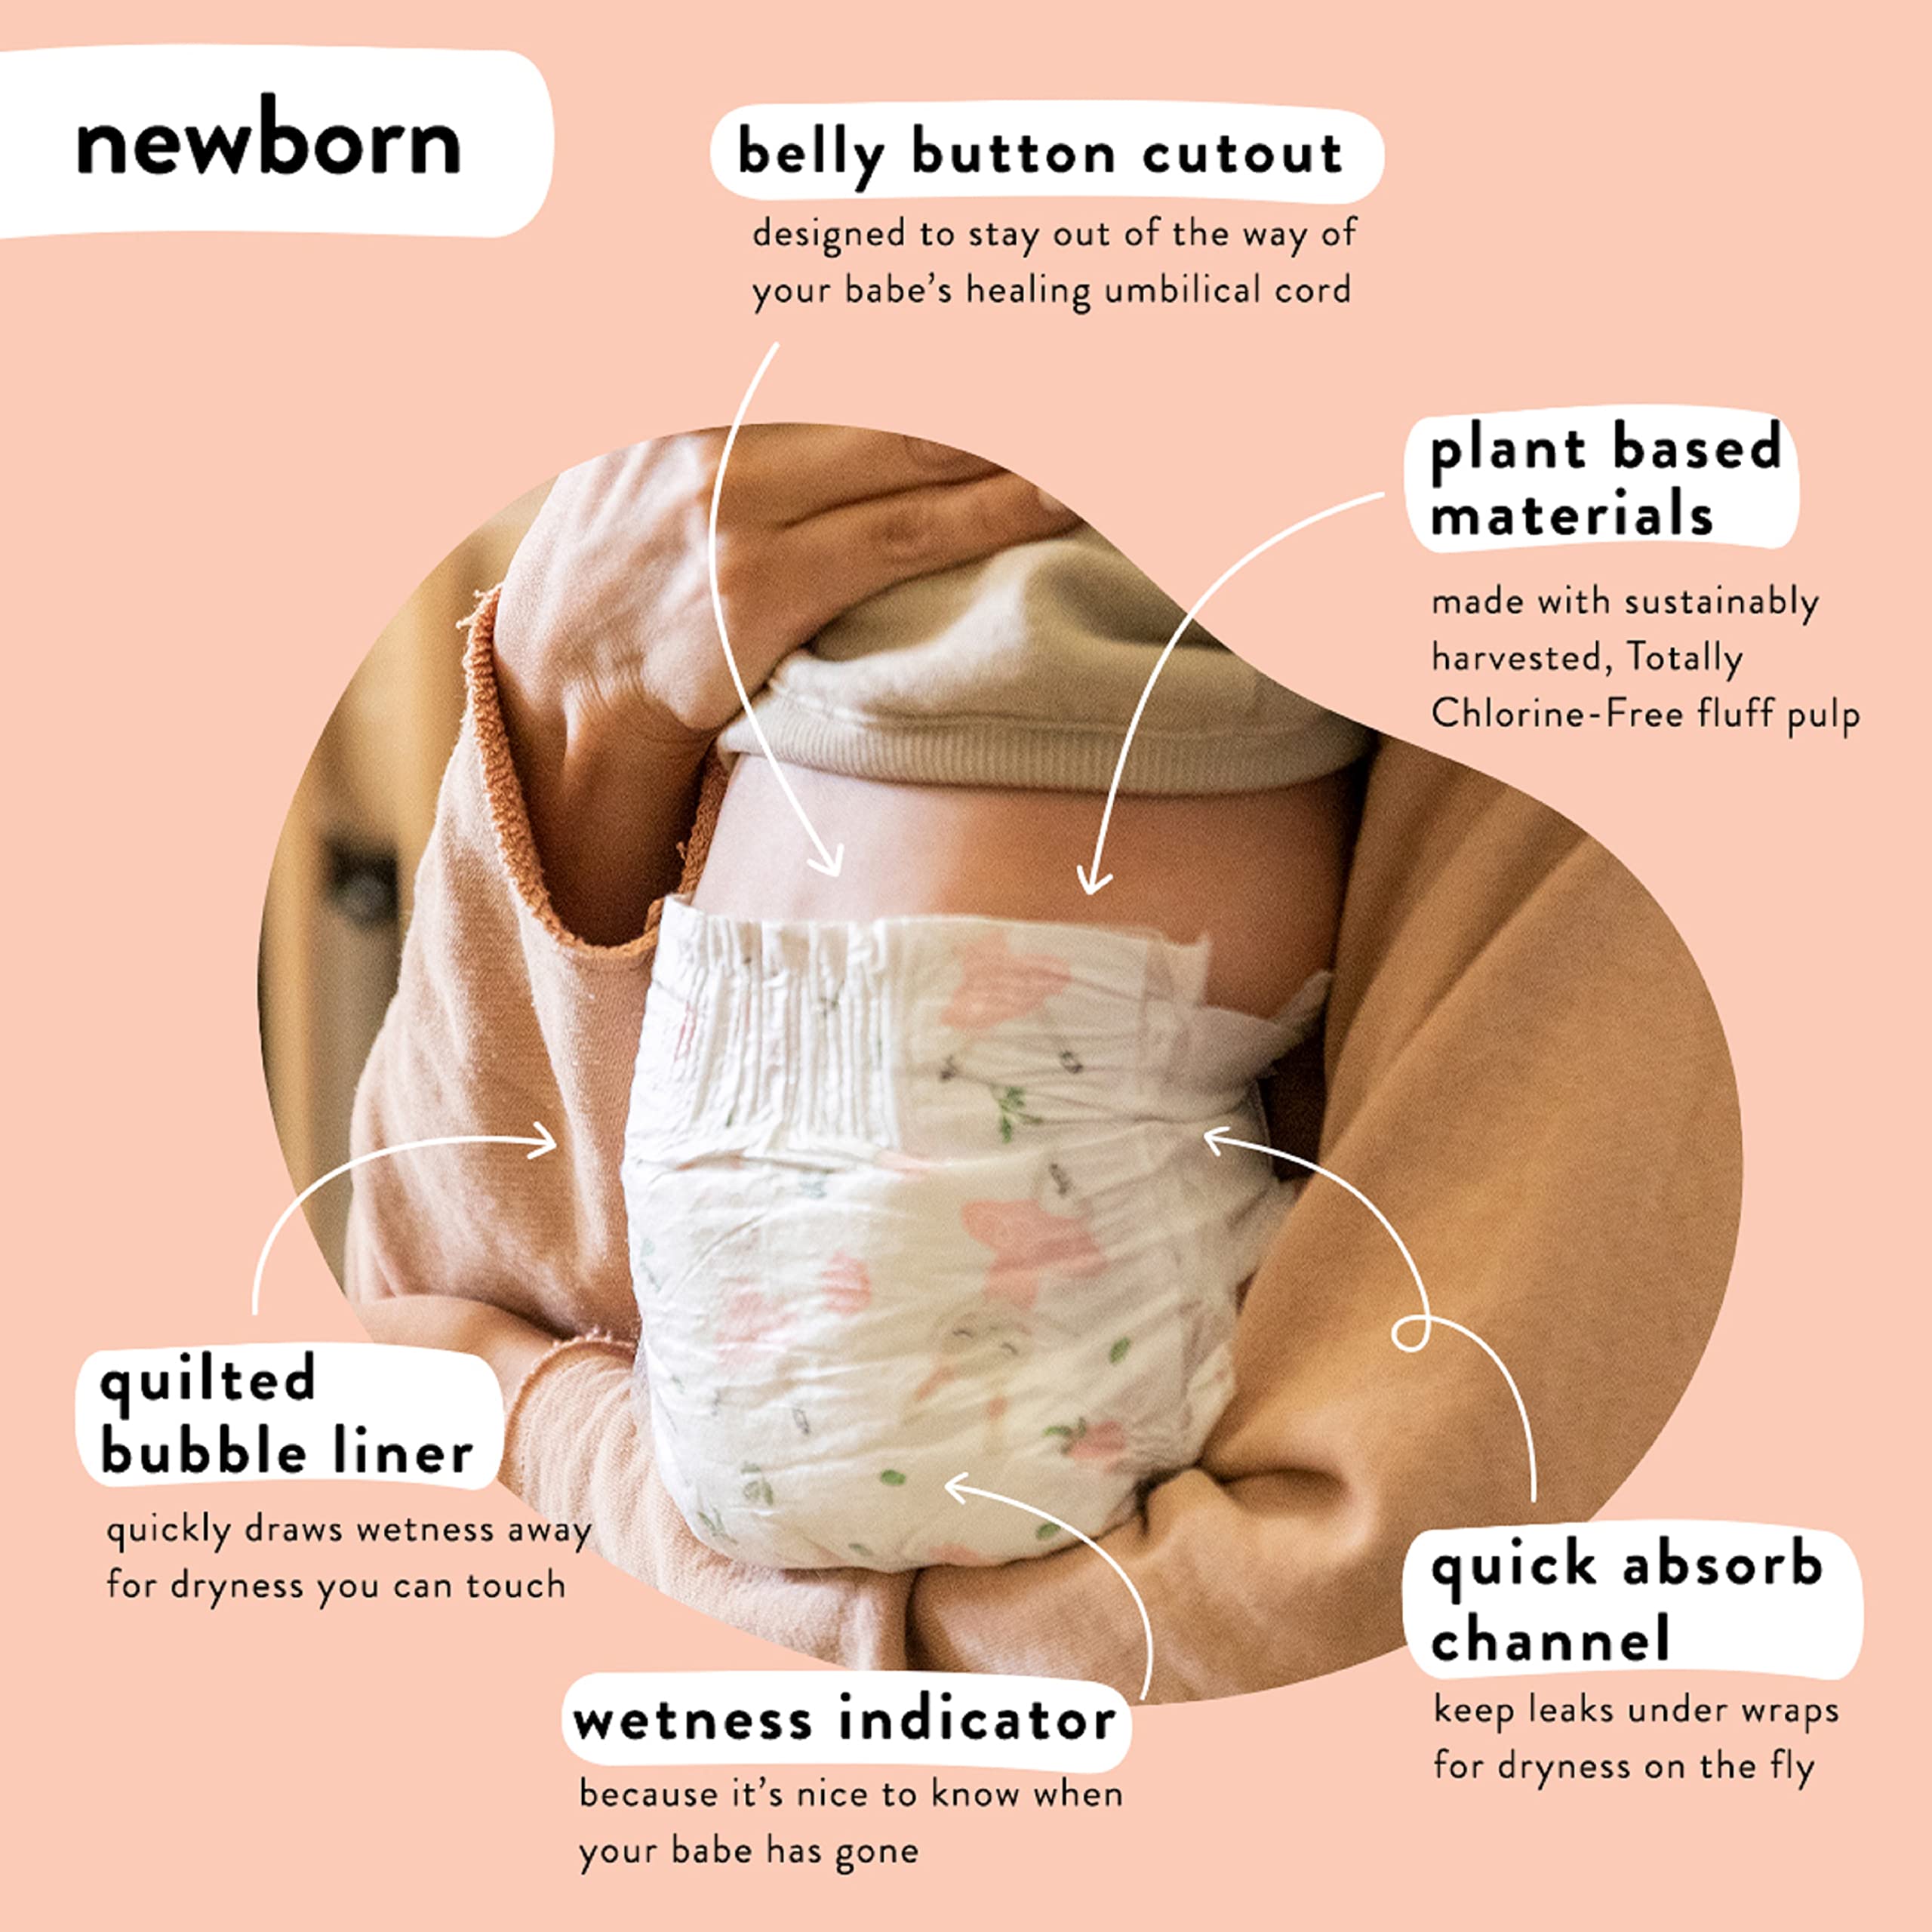 The Honest Company Clean Conscious Diapers | Plant-Based, Sustainable | Rose Blossom + Tutu Cute | Club Box, Size Newborn, 76 Count